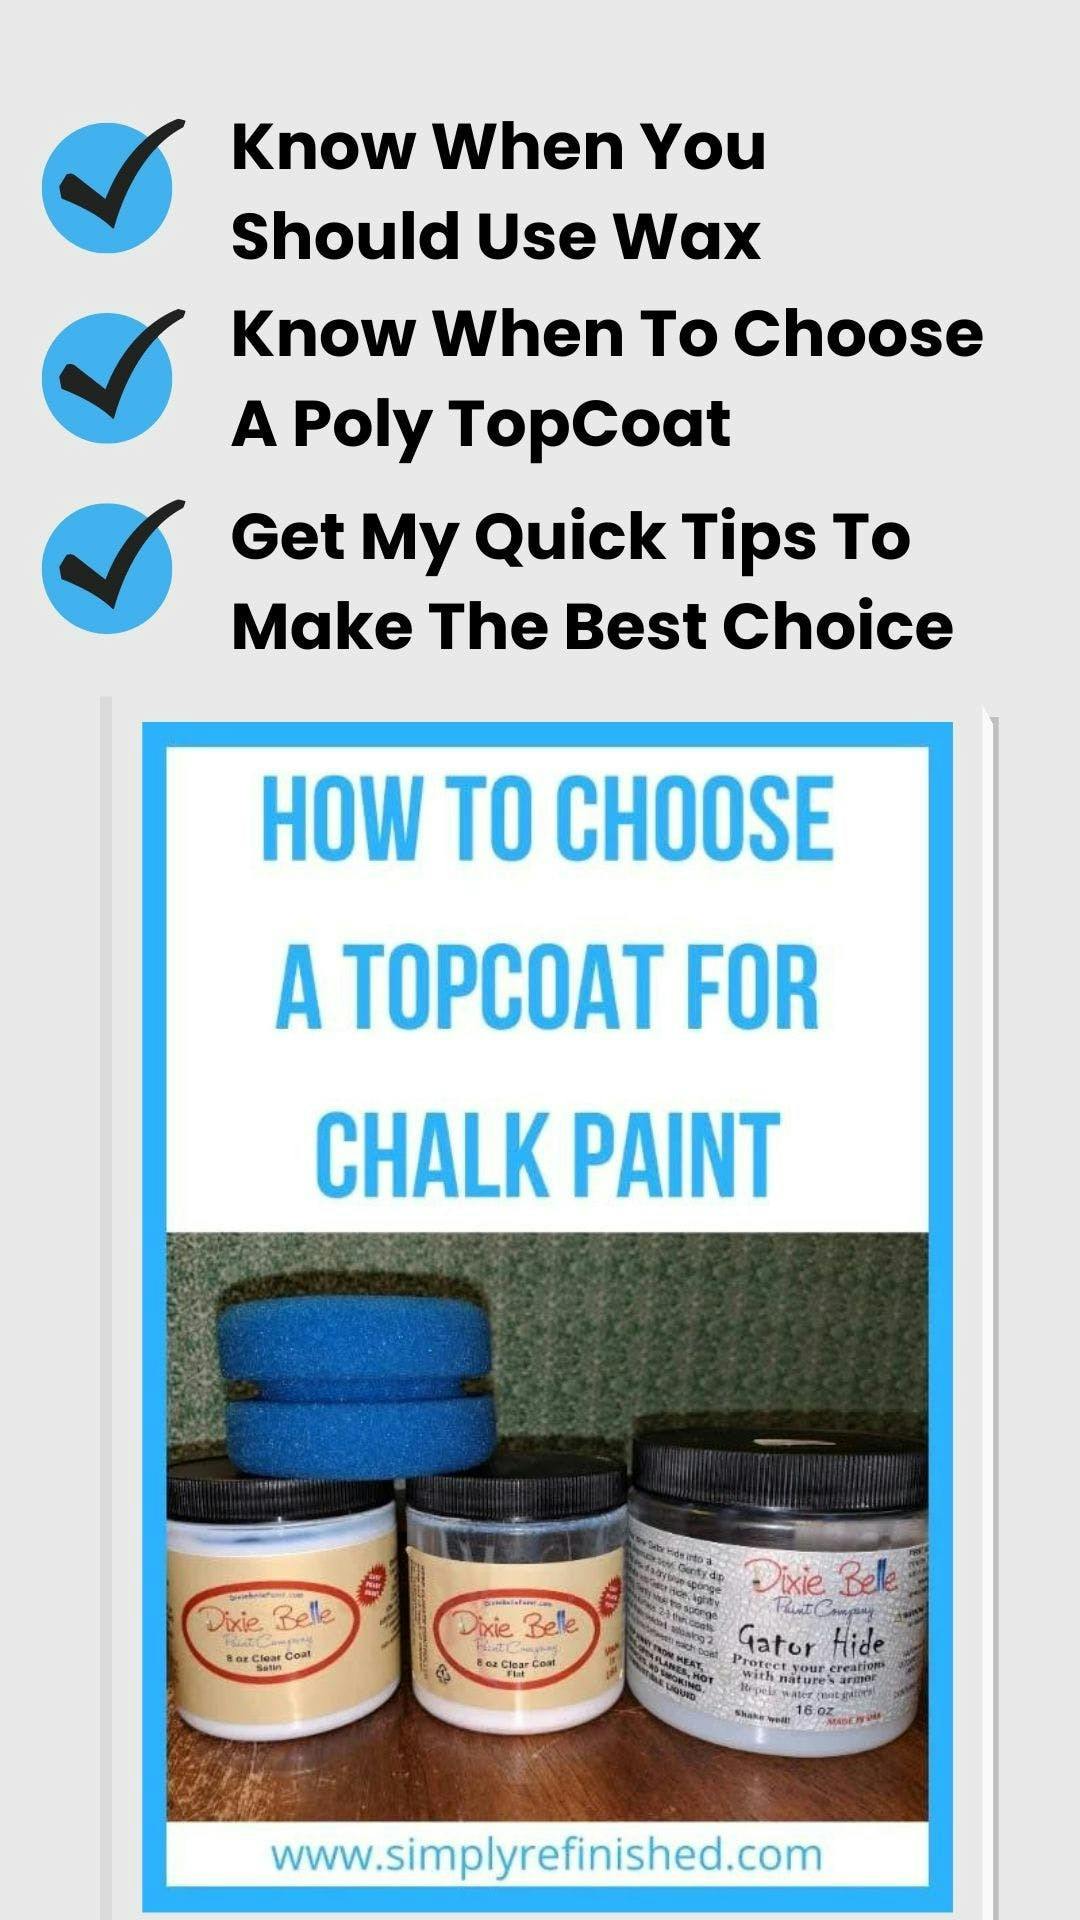 Wax or Polycrylic over chalk paint? - Painted Vintage